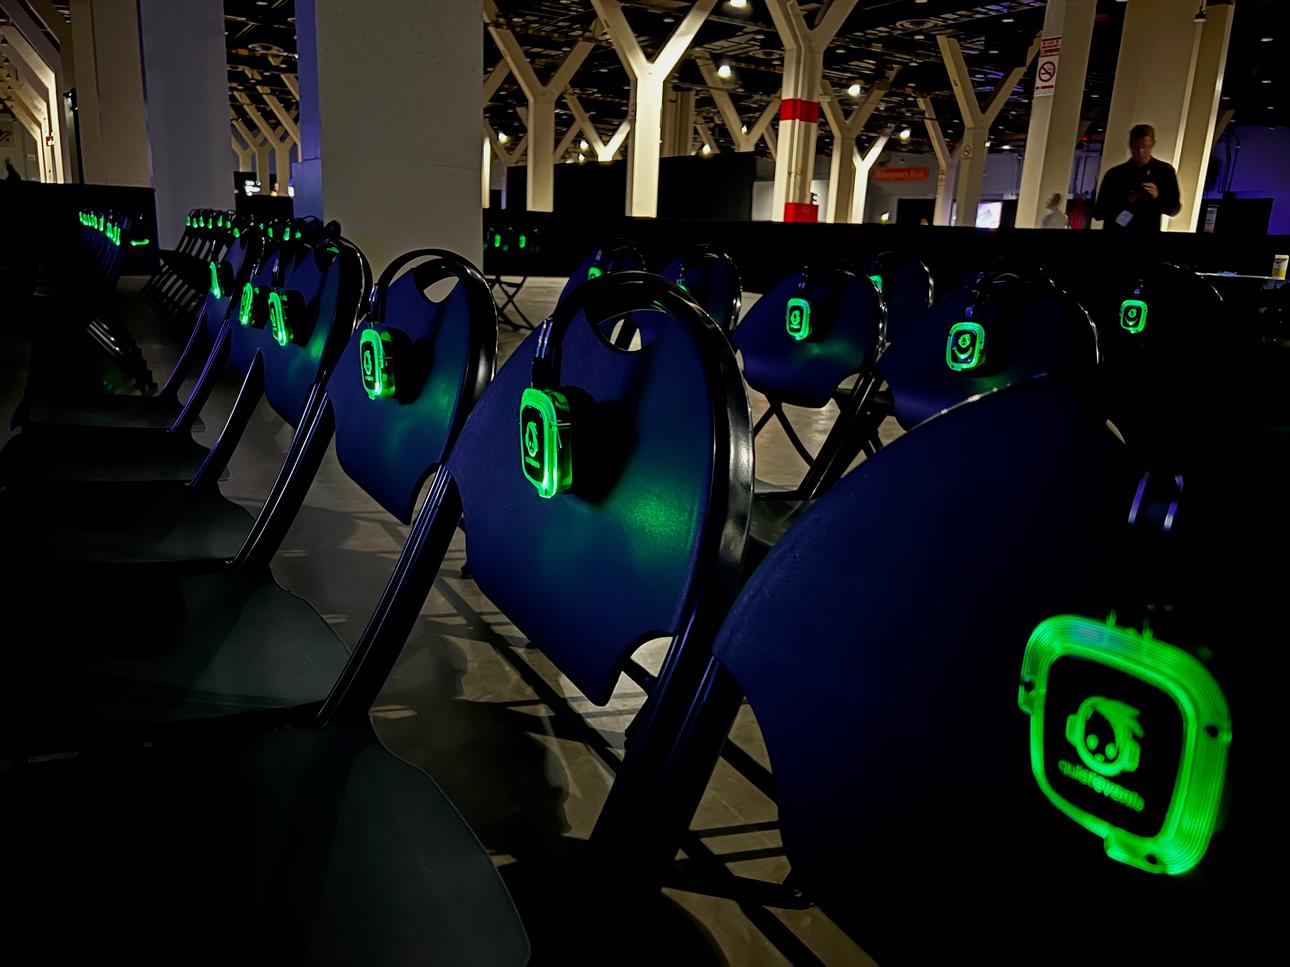 Many chairs set with green glowing head phones which are on a local radio broadcast such that the presenter on stage's mic is played through many headphone instead of stage speakers. This permitted many presentations to occur near one another in a shared space without noise from each other. However, the head phones themselves transmitted noise from the microphone and audio mixing deck into everyone's ears.